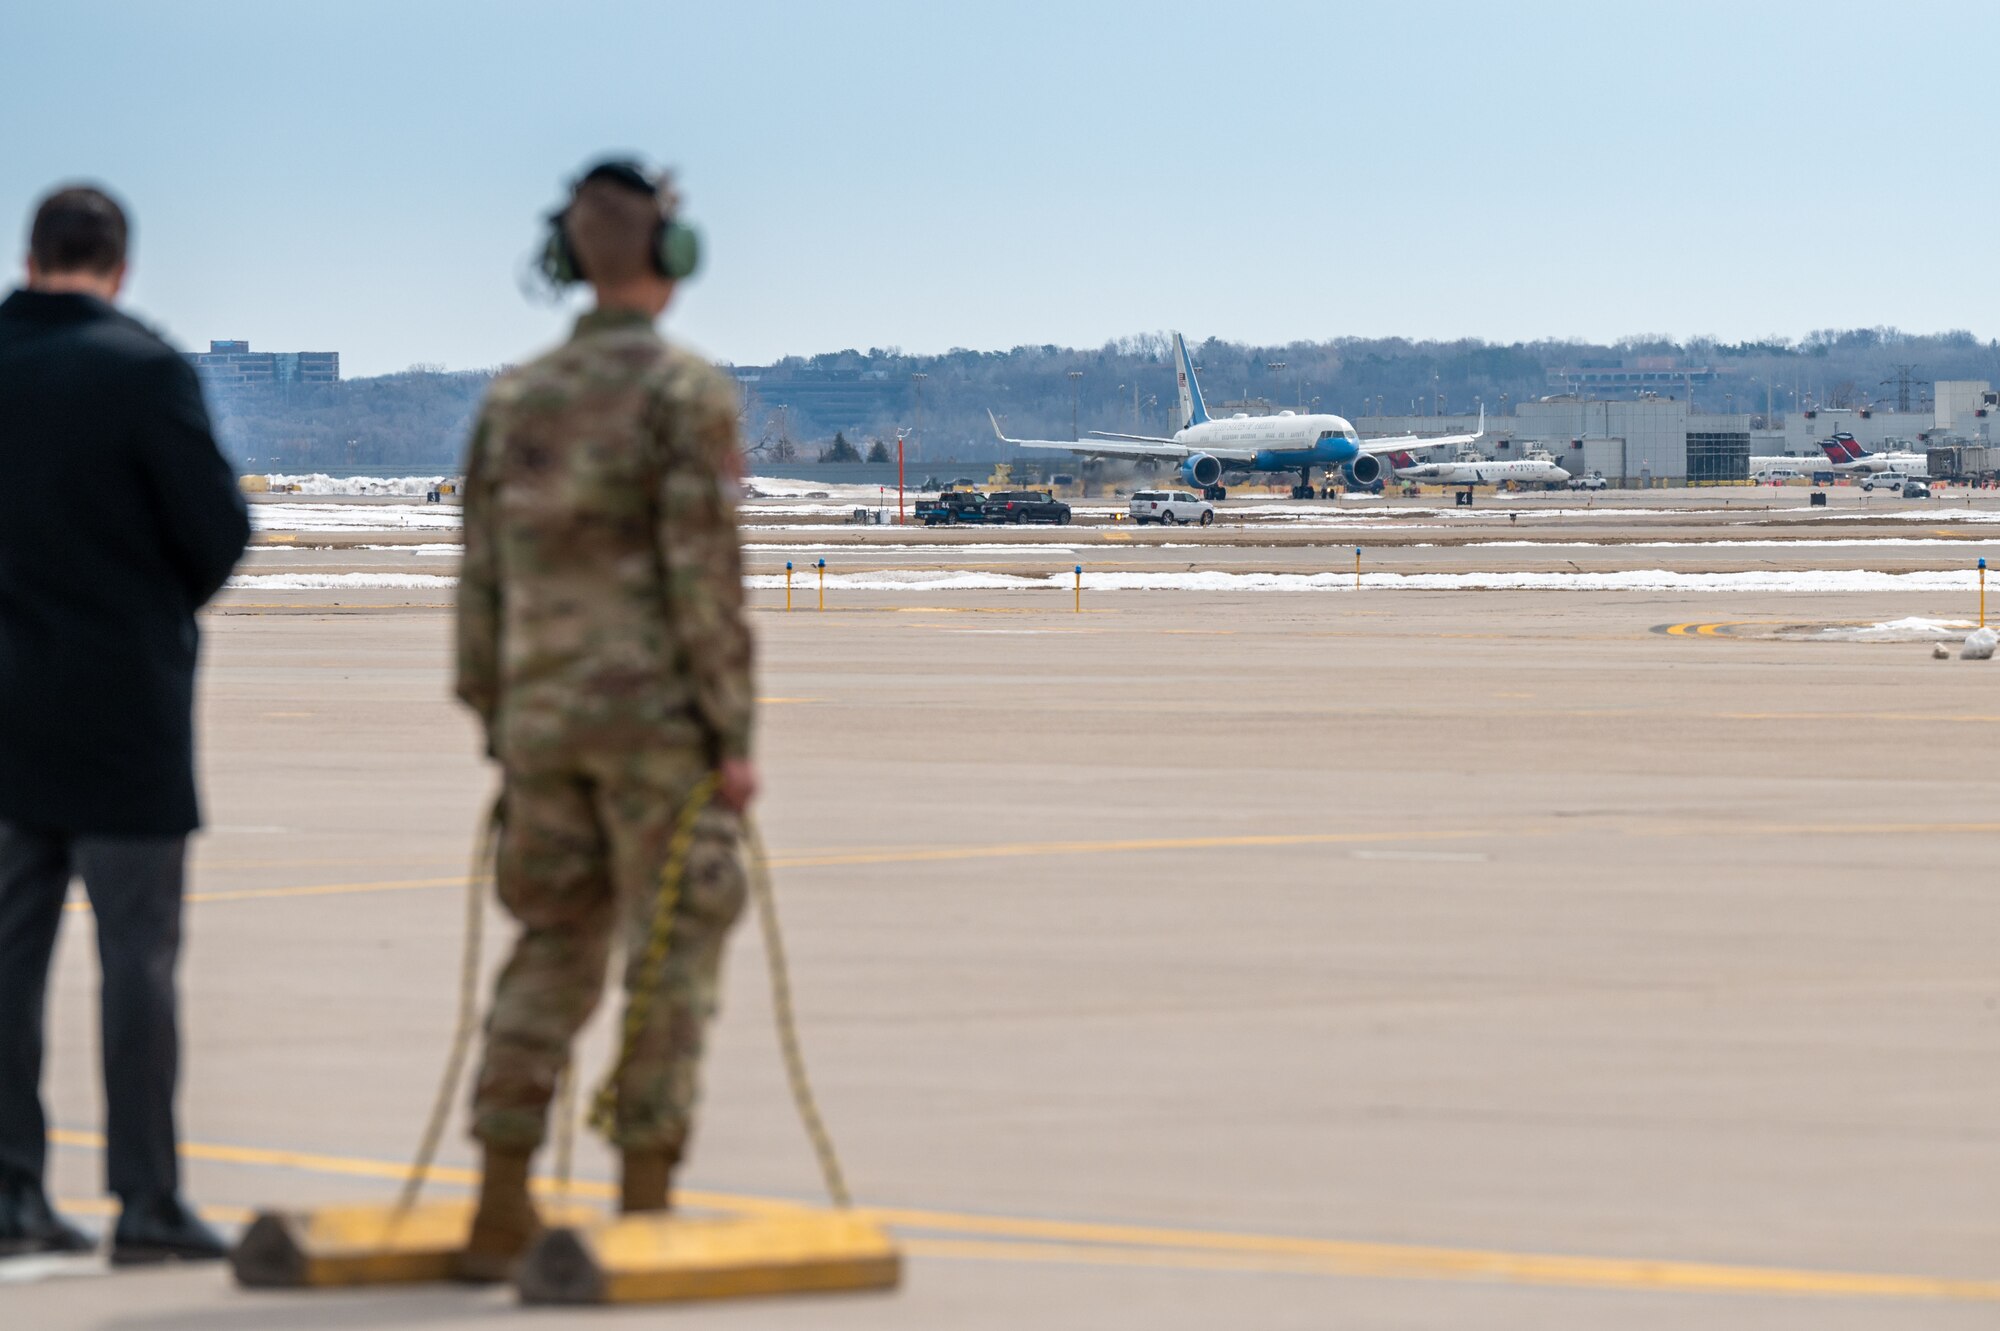 Airman 1st Class Jaxon Jeffries, 934th Aircraft Maintenance Squadron crew chief, watches Air Force One land at Minneapolis-St. Paul Air Reserve Station, April 3, 2023. Jeffries was chosen to place chalks at the aircraft. (U.S. Air Force photo by Master Sgt. Trevor Saylor)